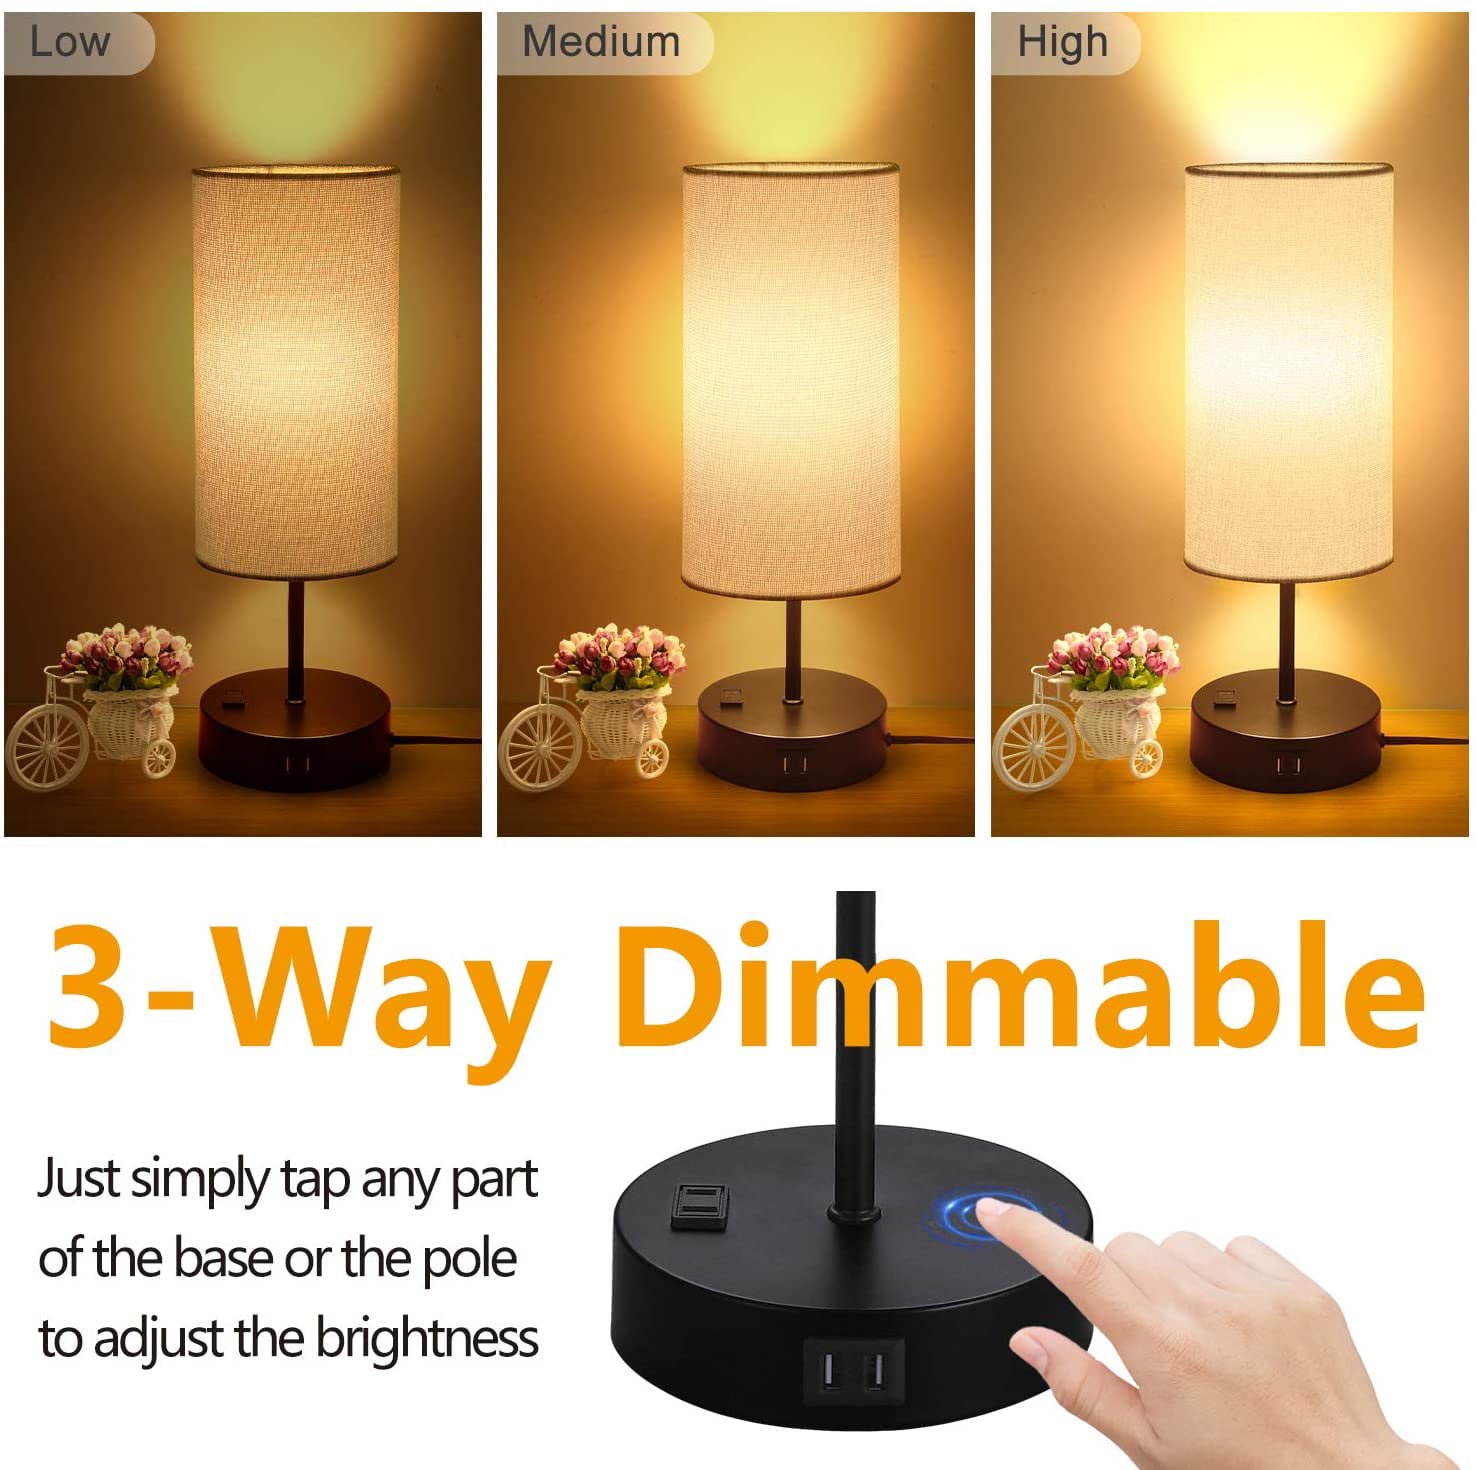 Industrial Metal Bedside Desk Nightstand Lamp Ideal for Bedroom Living Room 3-Way Touch Control Dimmable Table Lamp with 2 USB Charging Ports AC Outlet & Vintage St64 E26 Edison LED Bulbs Included 